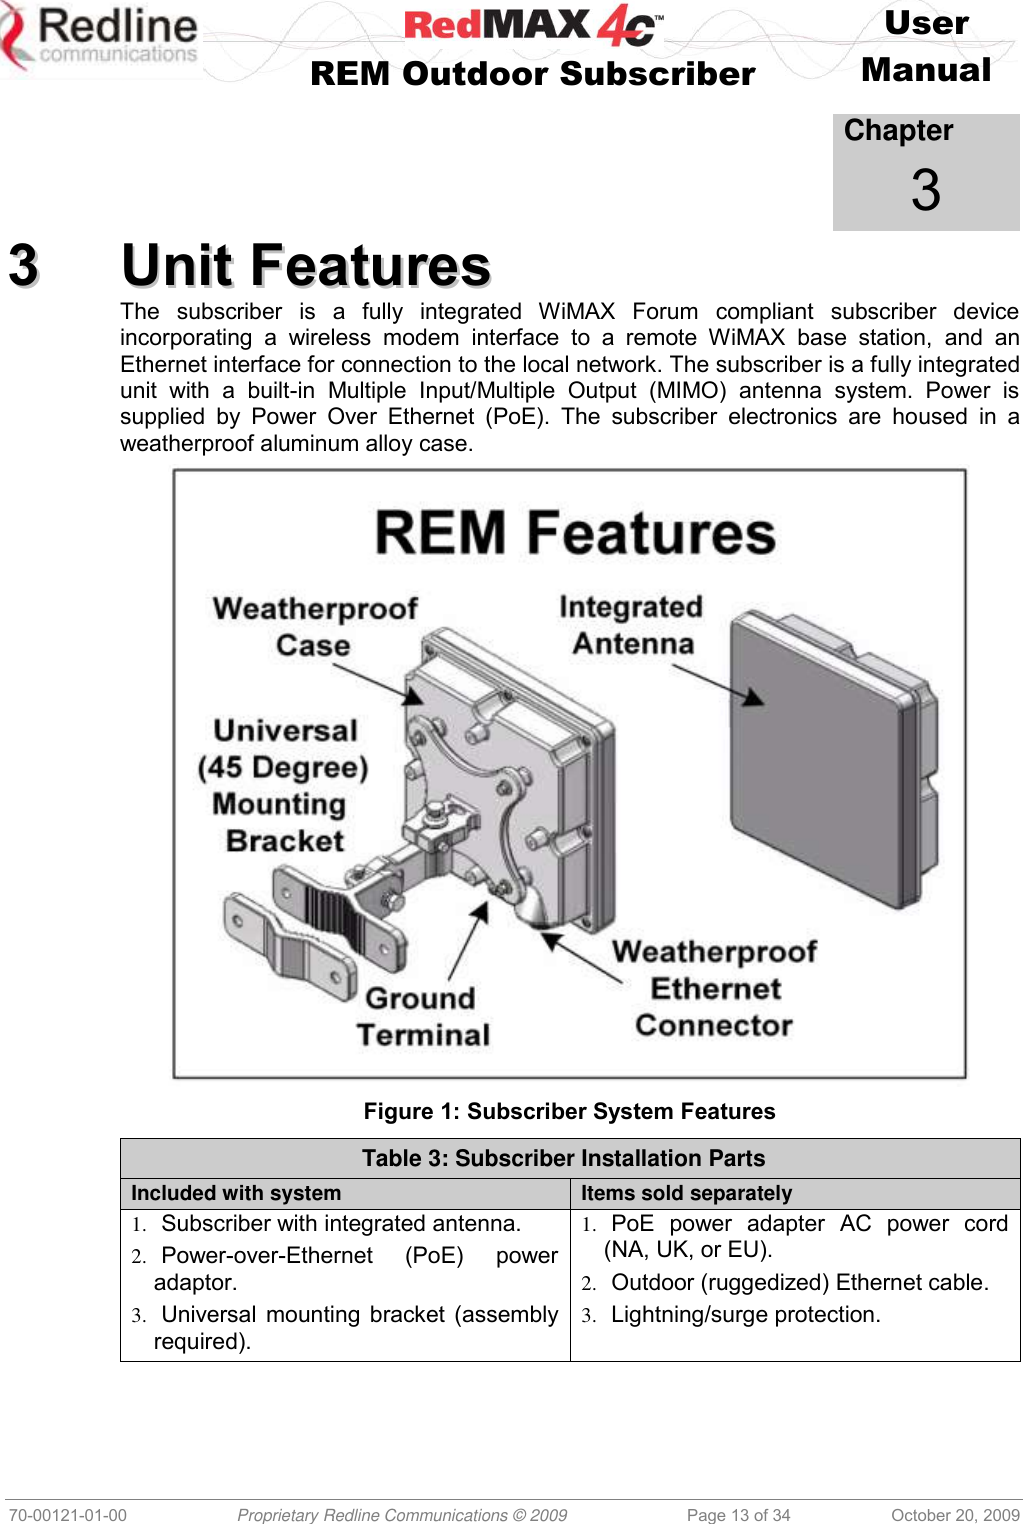    User   REM Outdoor Subscriber  Manual   70-00121-01-00 Proprietary Redline Communications © 2009 Page 13 of 34 October 20, 2009            Chapter 3 33  UUnniitt  FFeeaattuurreess  The  subscriber  is  a  fully  integrated  WiMAX  Forum  compliant  subscriber  device incorporating  a  wireless  modem  interface  to  a  remote  WiMAX  base  station,  and  an Ethernet interface for connection to the local network. The subscriber is a fully integrated unit  with  a  built-in  Multiple  Input/Multiple  Output  (MIMO)  antenna  system.  Power  is supplied  by  Power  Over  Ethernet  (PoE).  The  subscriber  electronics  are  housed  in  a weatherproof aluminum alloy case.  Figure 1: Subscriber System Features Table 3: Subscriber Installation Parts Included with system Items sold separately 1. Subscriber with integrated antenna. 2. Power-over-Ethernet  (PoE)  power adaptor. 3. Universal mounting bracket (assembly required). 1. PoE  power  adapter  AC  power  cord (NA, UK, or EU). 2. Outdoor (ruggedized) Ethernet cable. 3. Lightning/surge protection.  